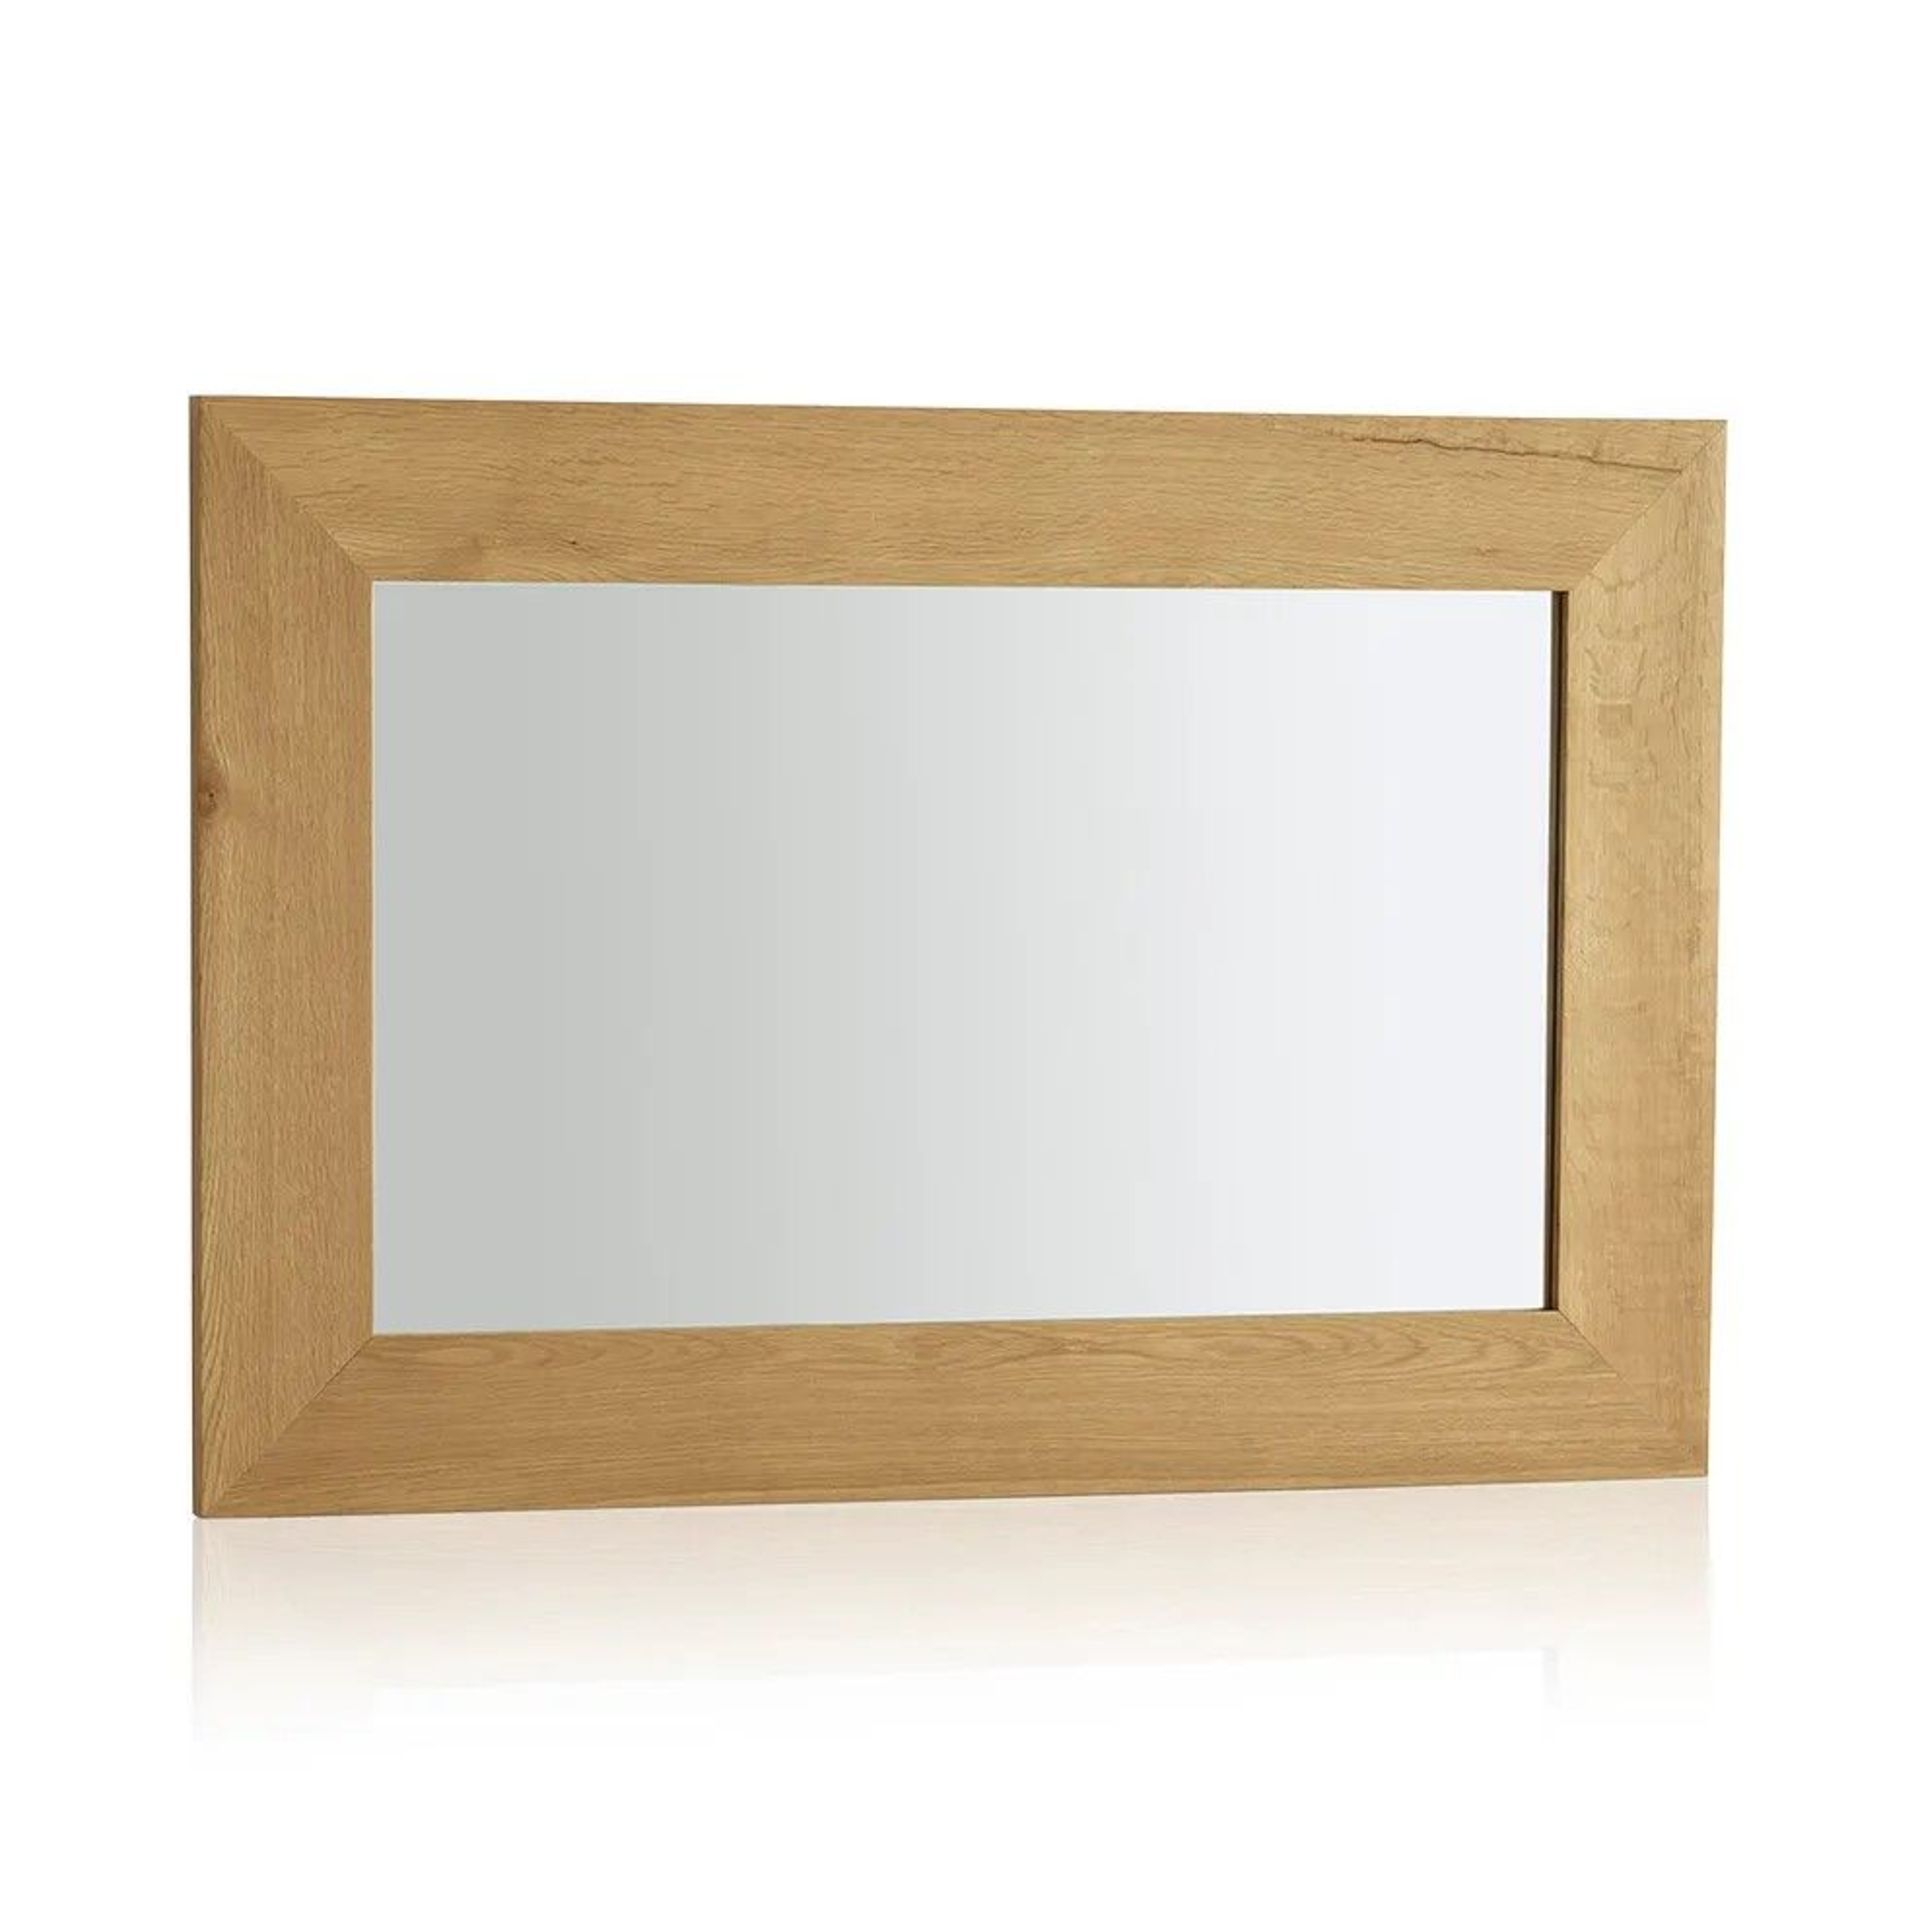 PALLET TO CONTAIN 8 x NEW BOXED Cosmopolitan Mirror Natural Solid Oak 900mm x 600mm Wall Mirror. RRP